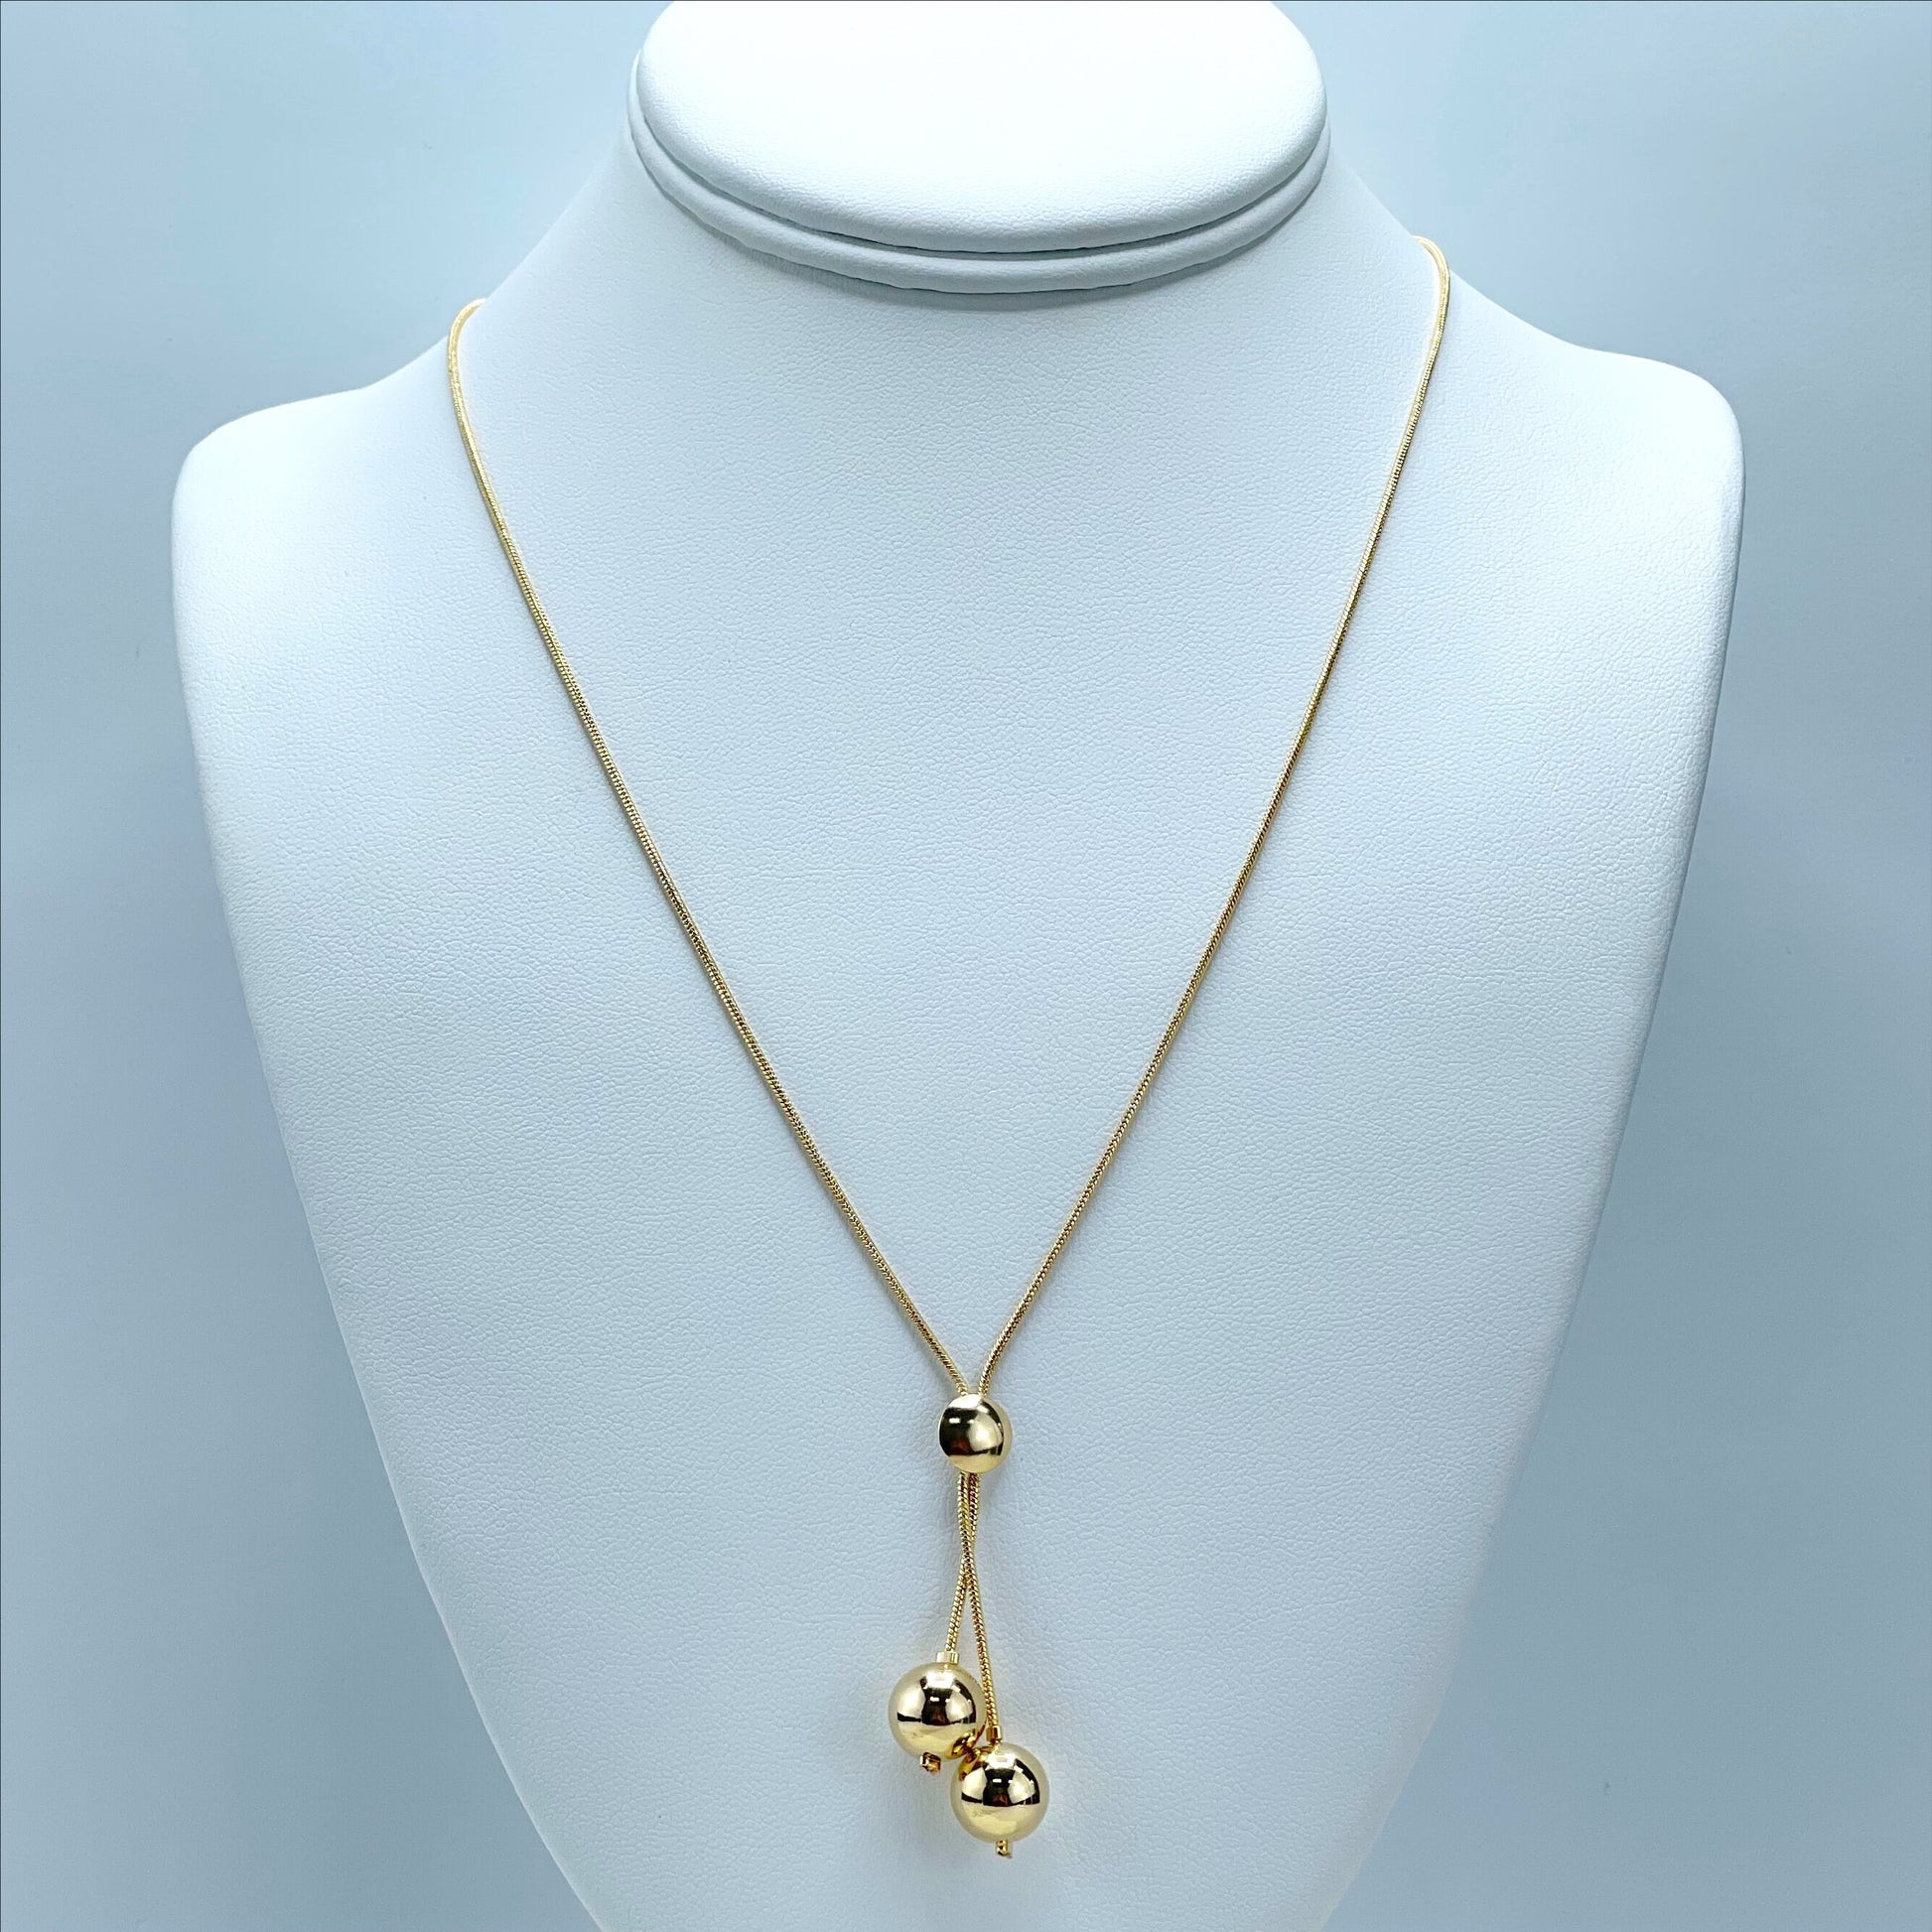 18k Gold Filled Spiral Link, Hanging Balls Necklace and  Earrings, Set for Wholesale and Jewelry Supplies, Making Supplies